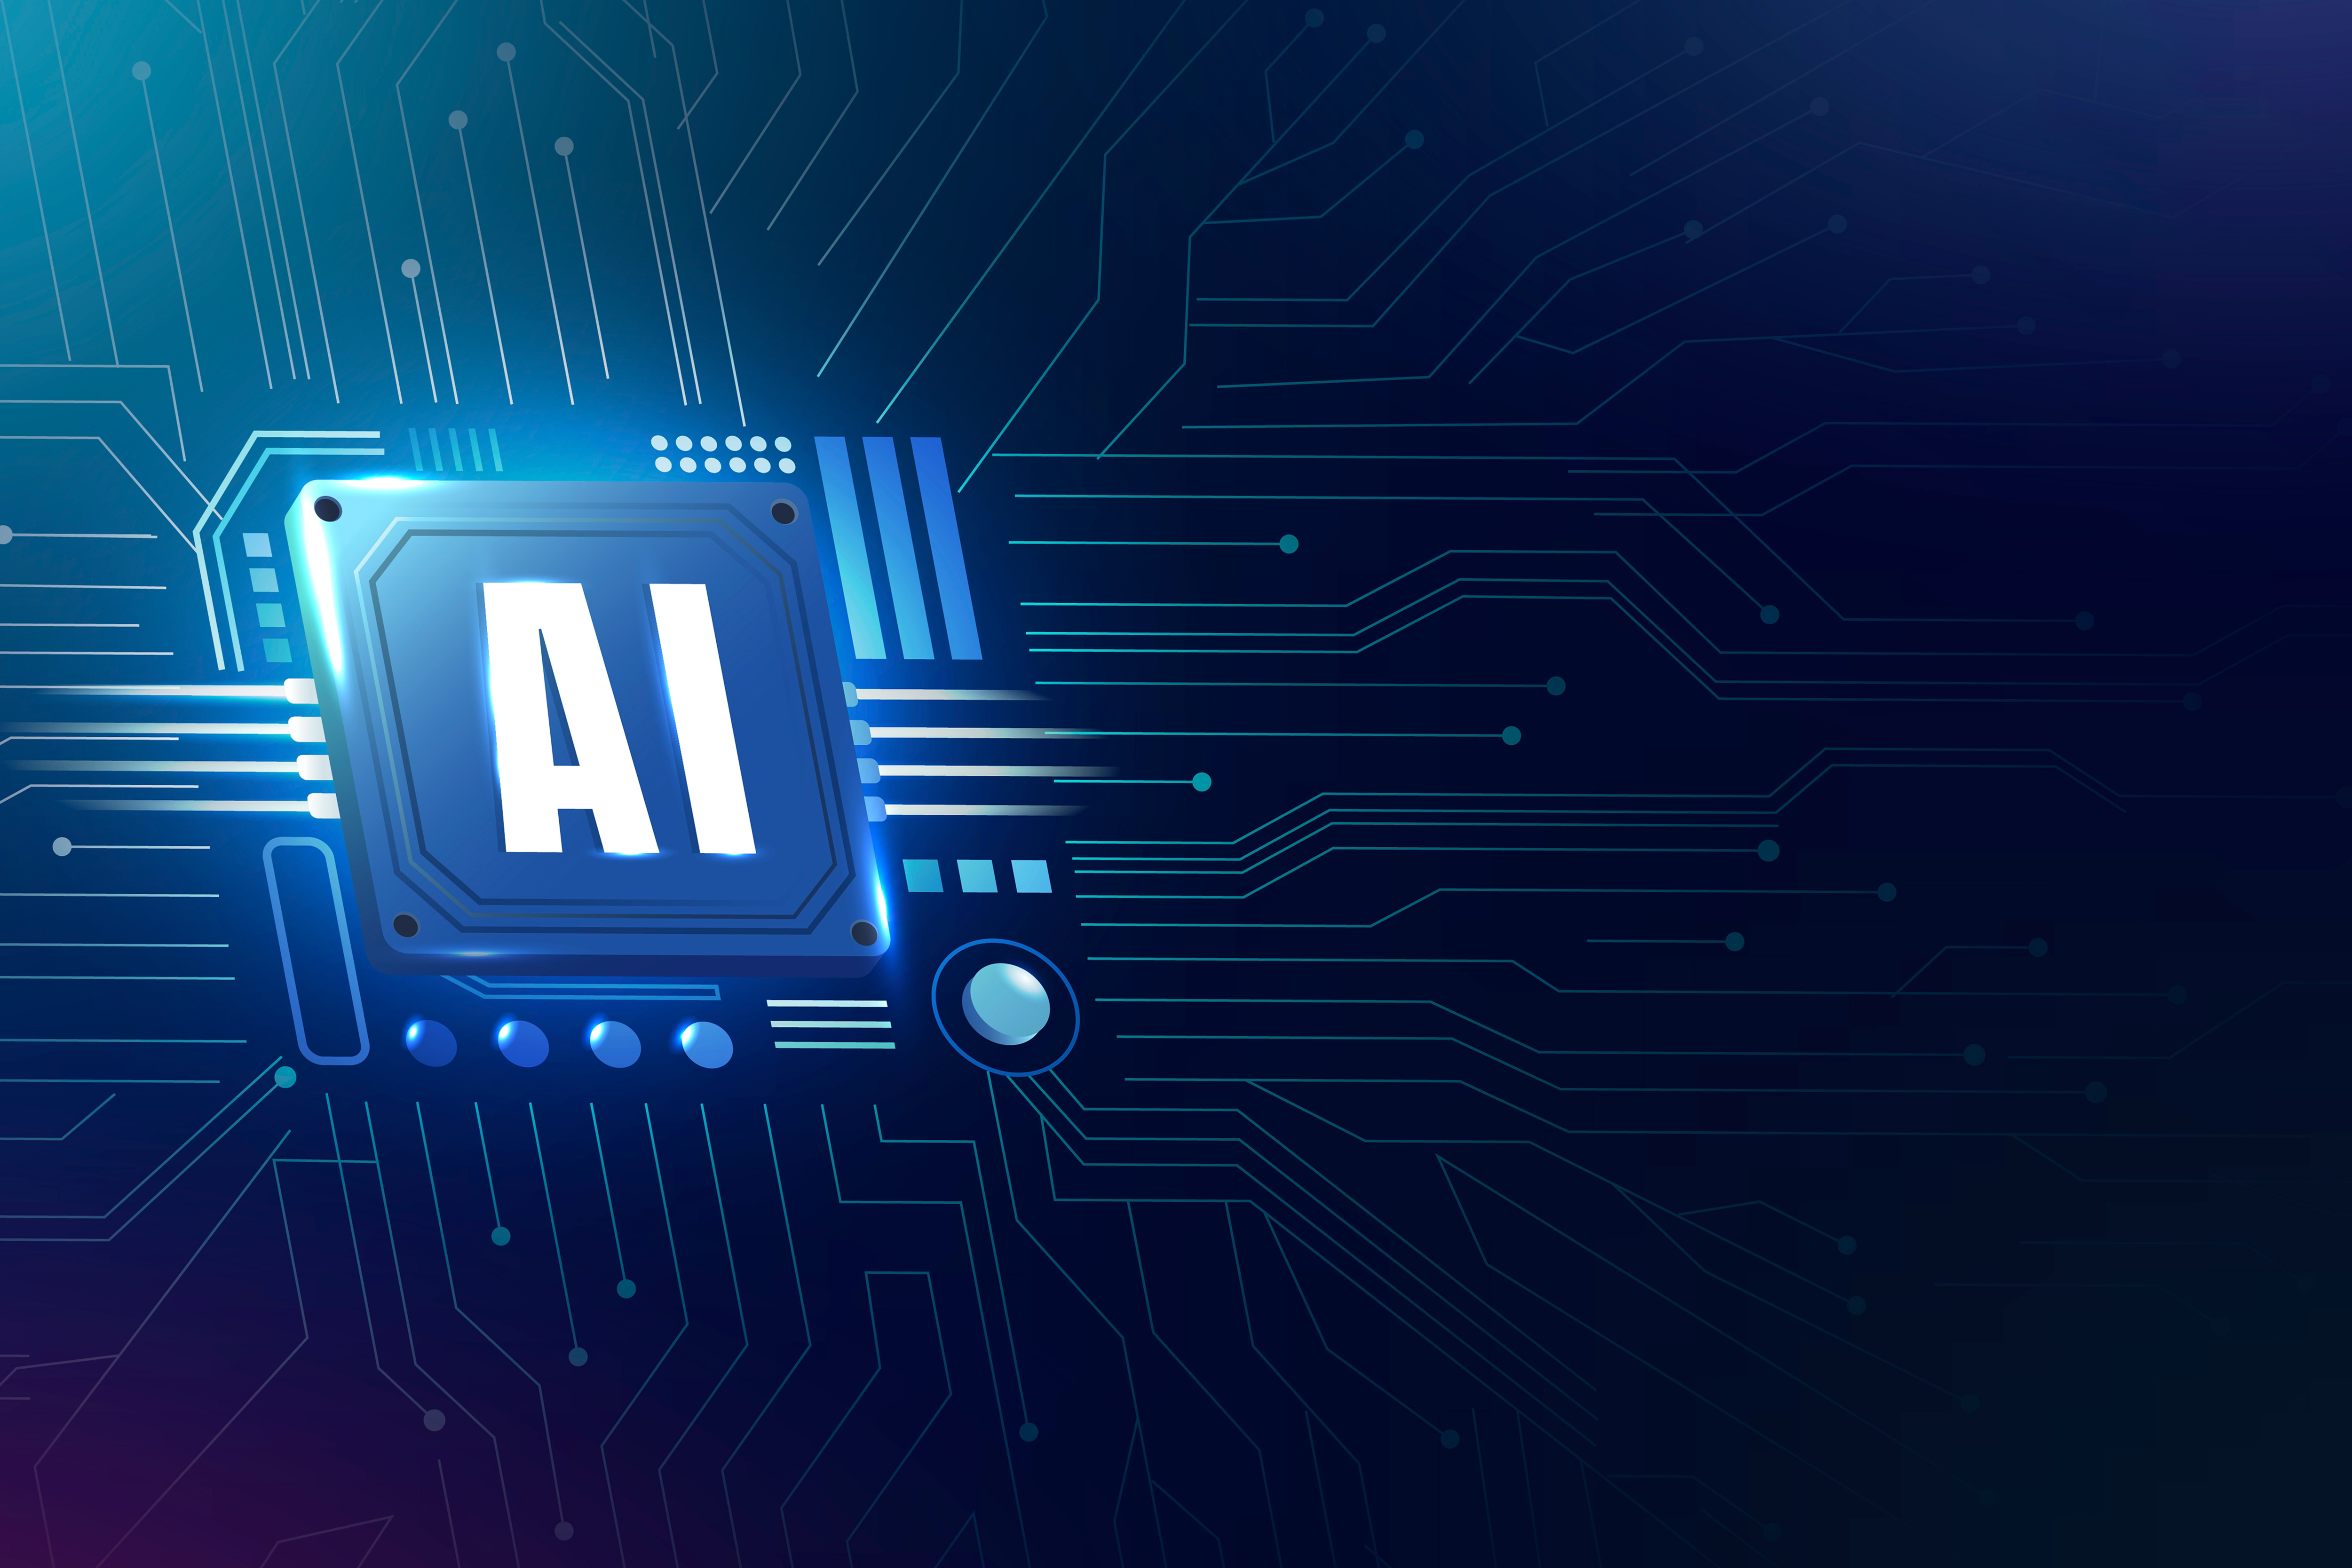 Top 10 industries with practical AI use cases.